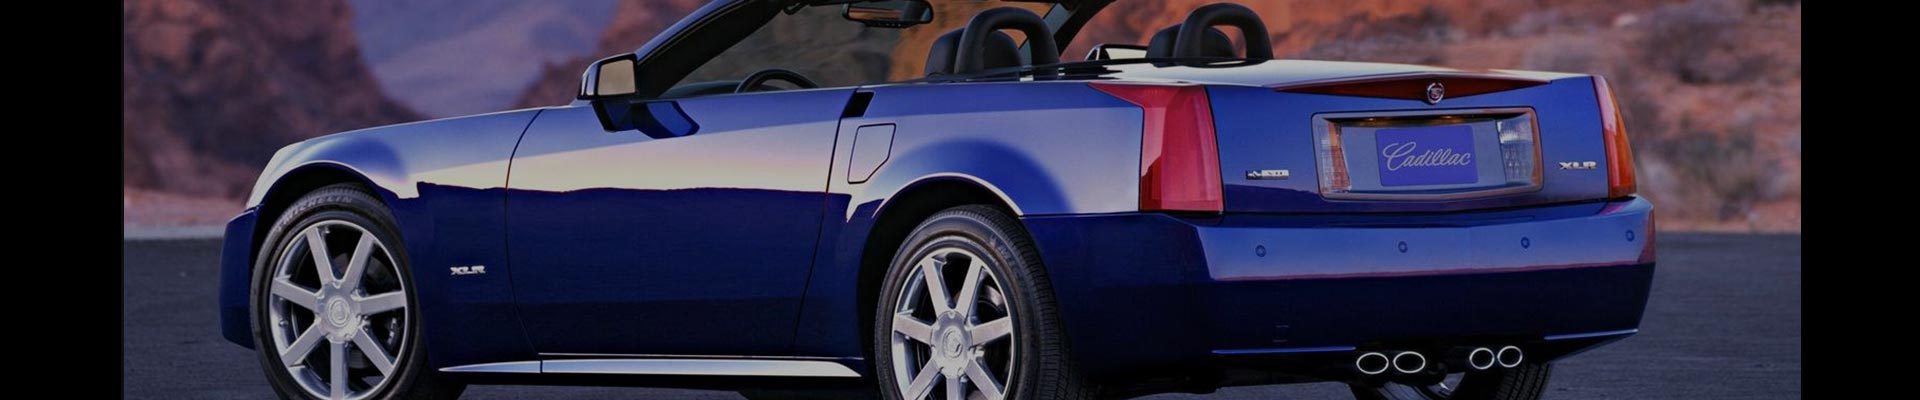 Shop Replacement and OEM 2008 Cadillac XLR Parts with Discounted Price on the Net